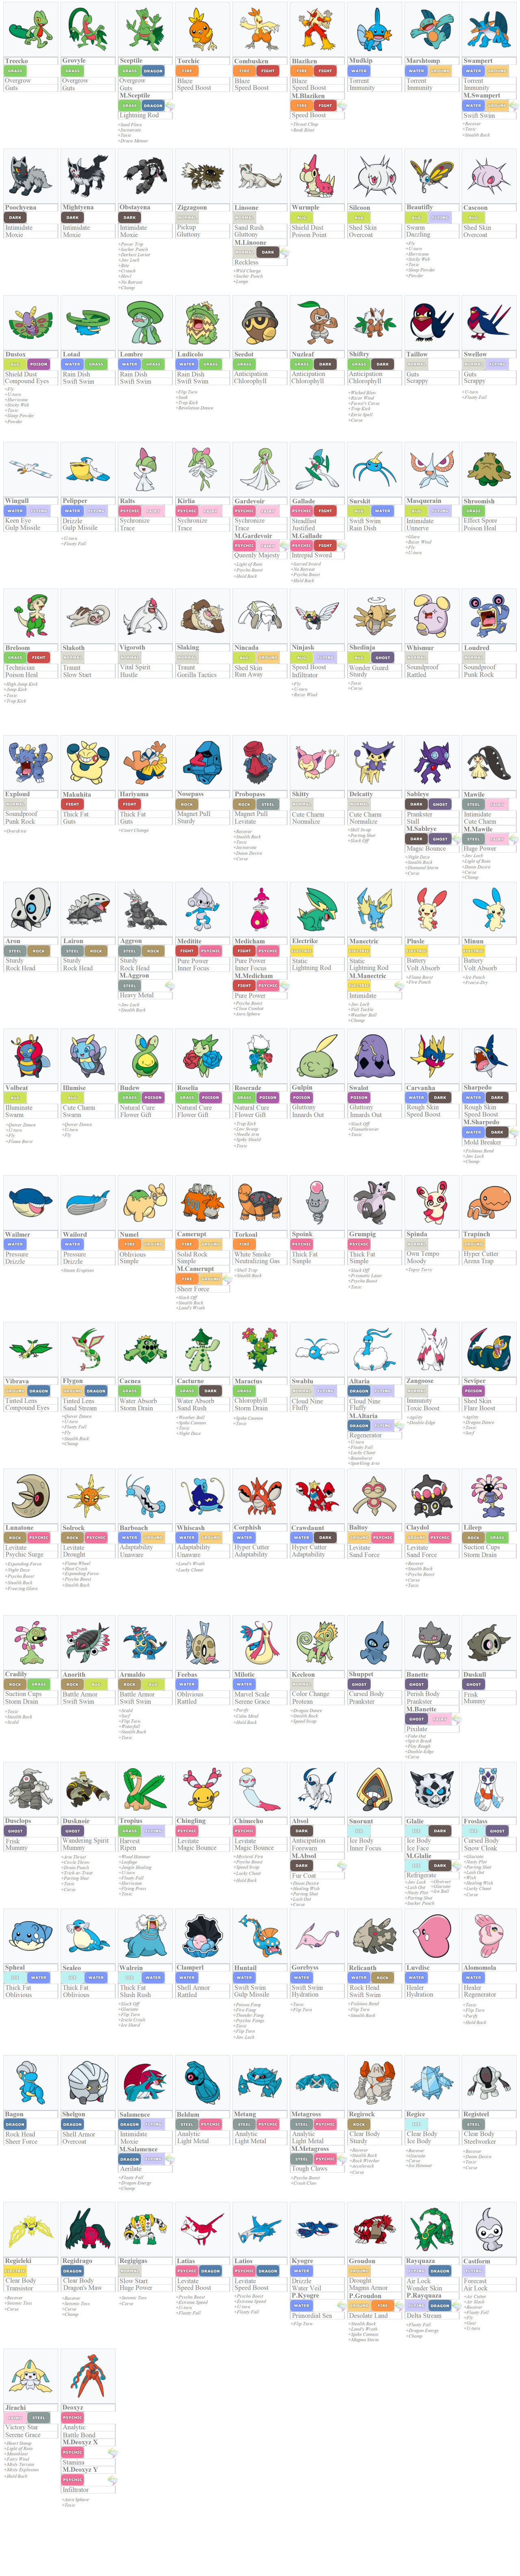 All 3 Hoenn Pokedex Holders and Their Abilities Explained